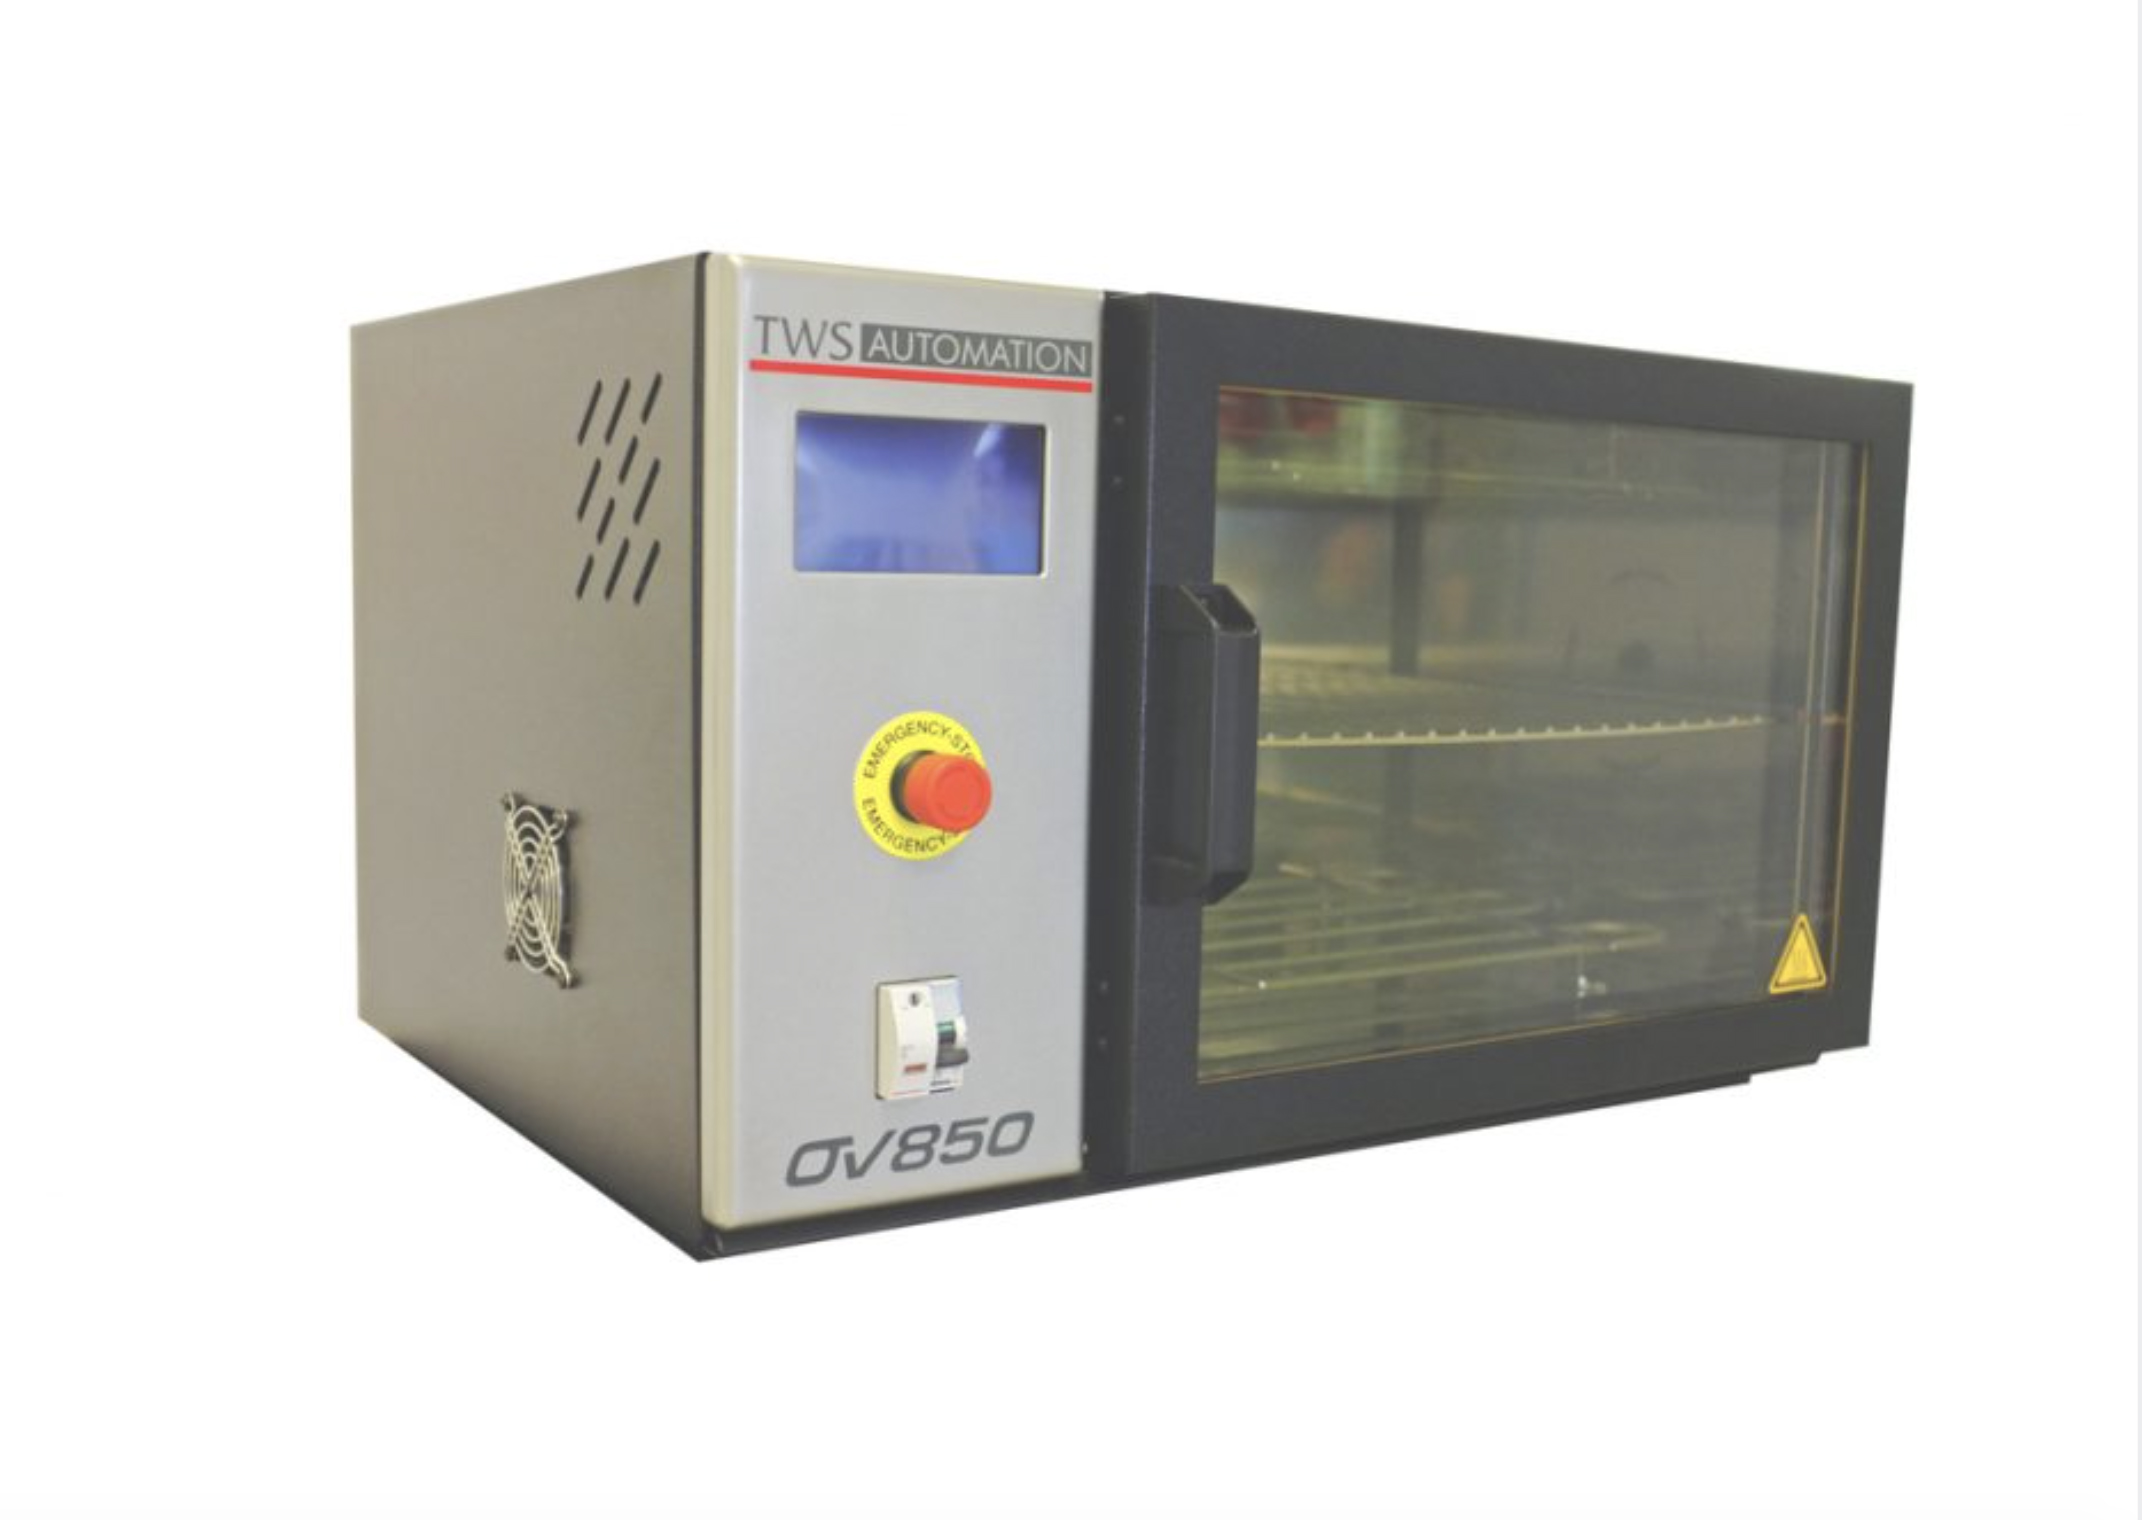 SMT Reflow Ovens for Solder Reflow and Adhesive Curing